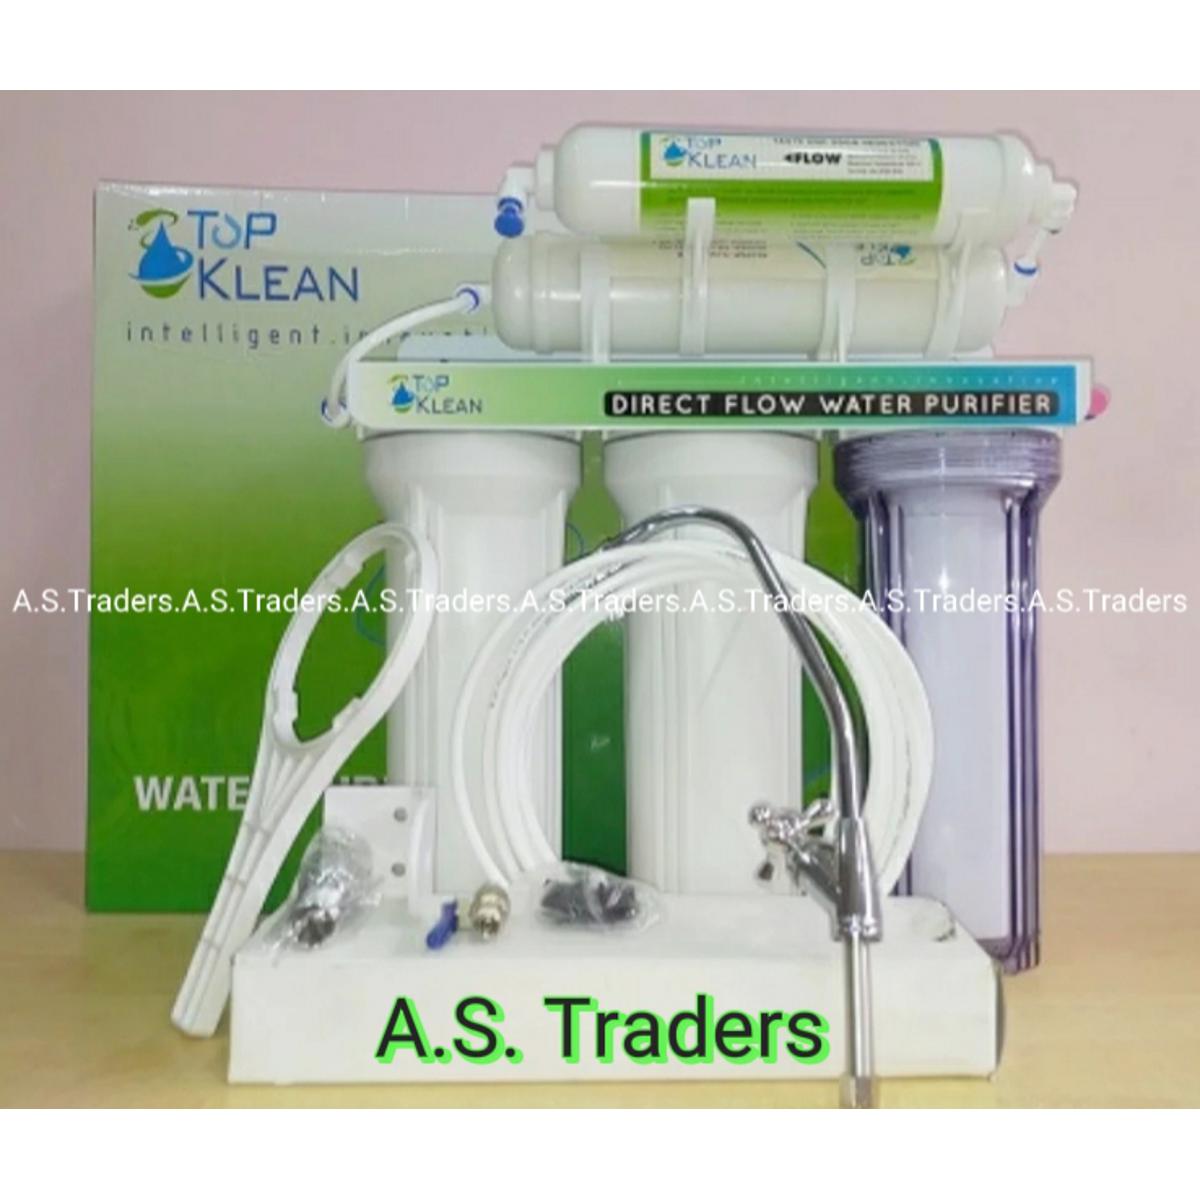 Top Klean Water Purifier Filter 5 Stage ( Non Electric)